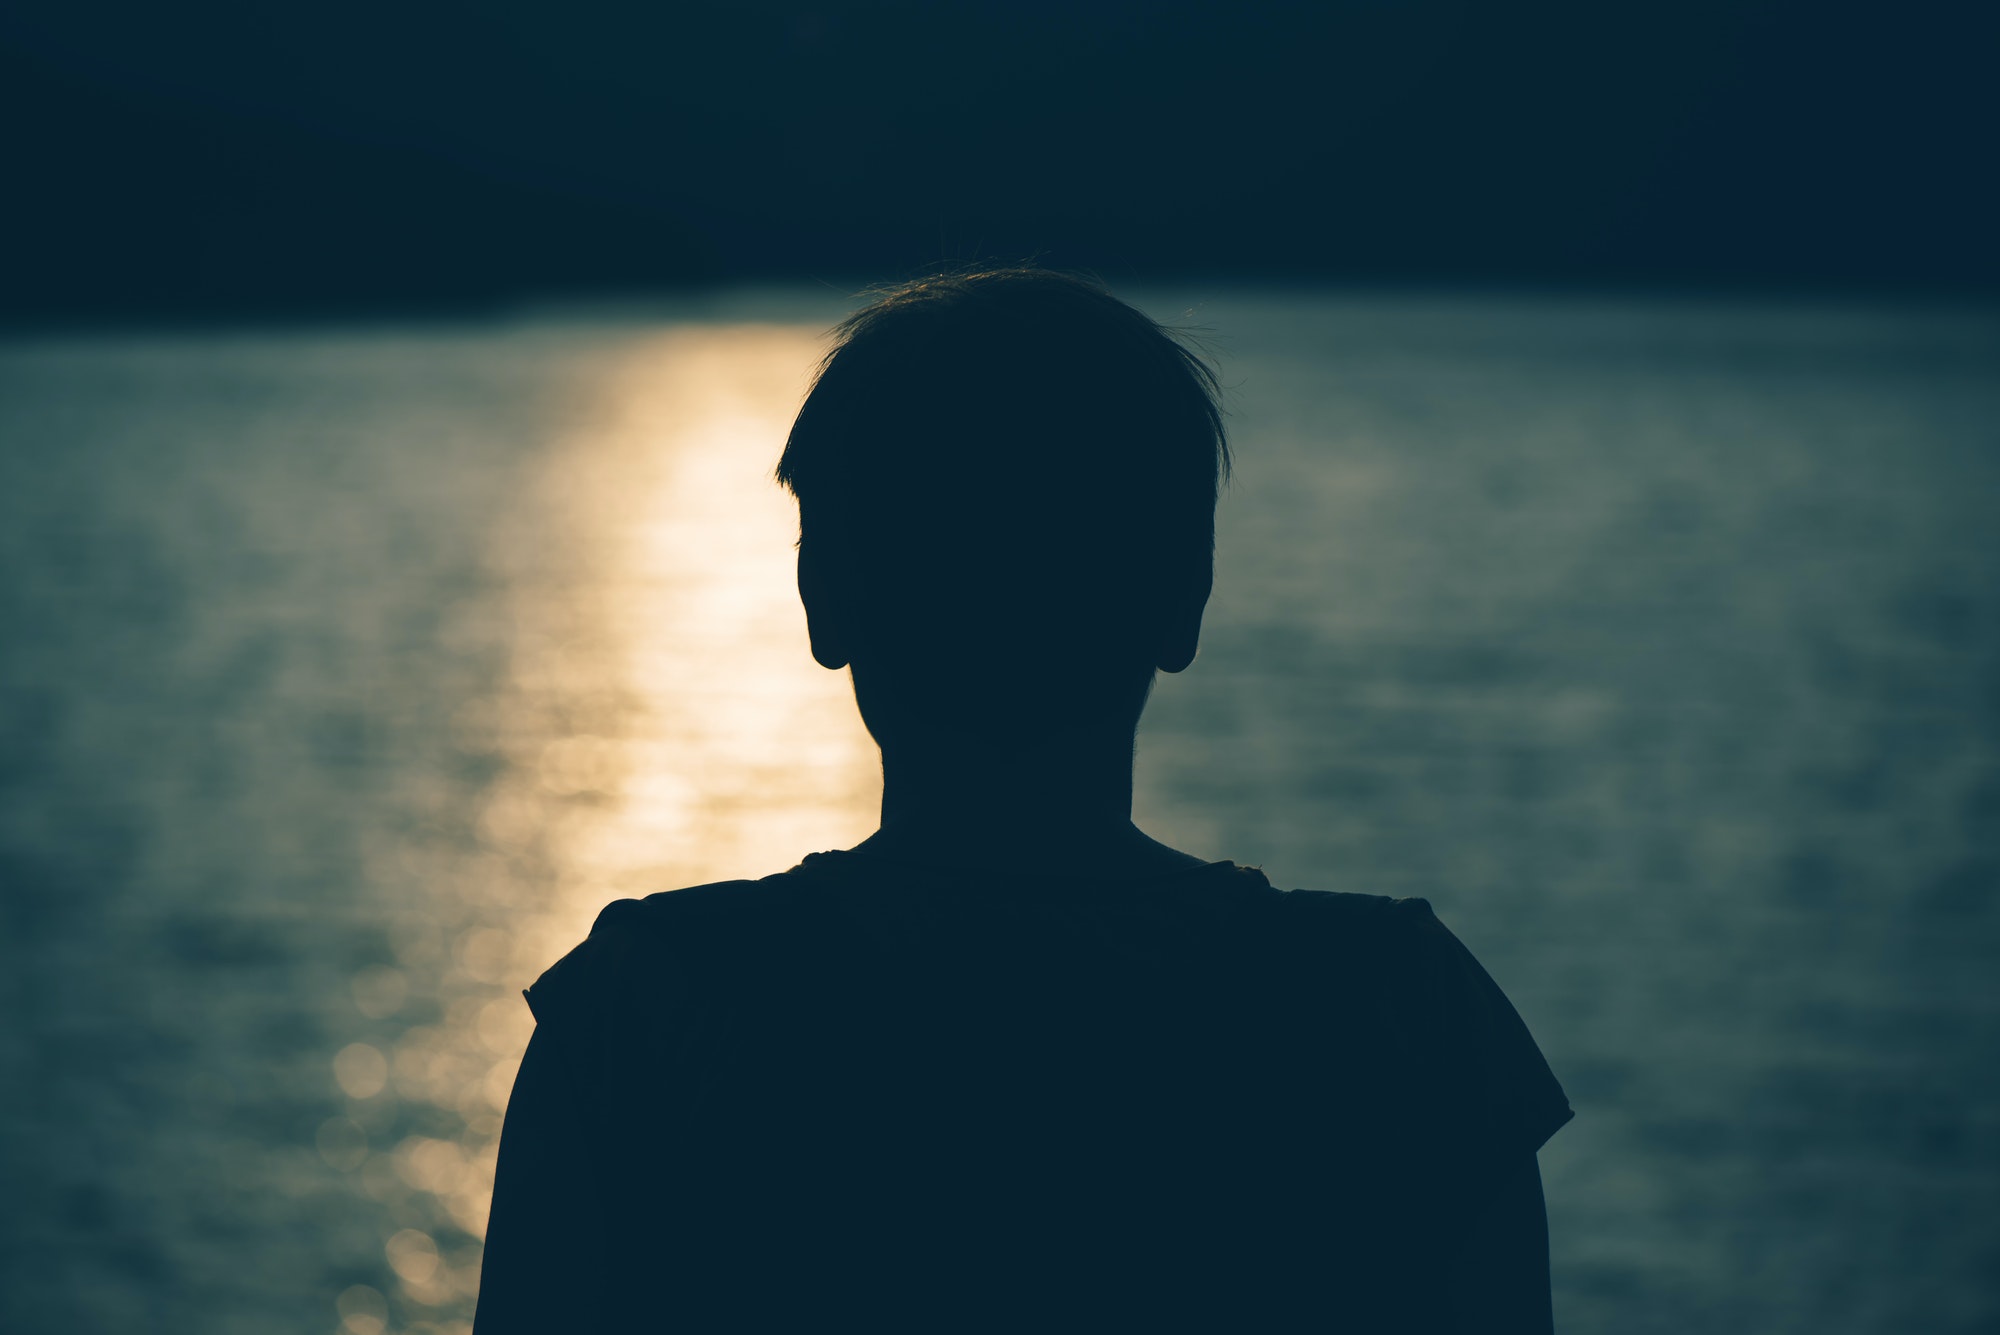 Silhouette of depressed sad woman standing by the lake